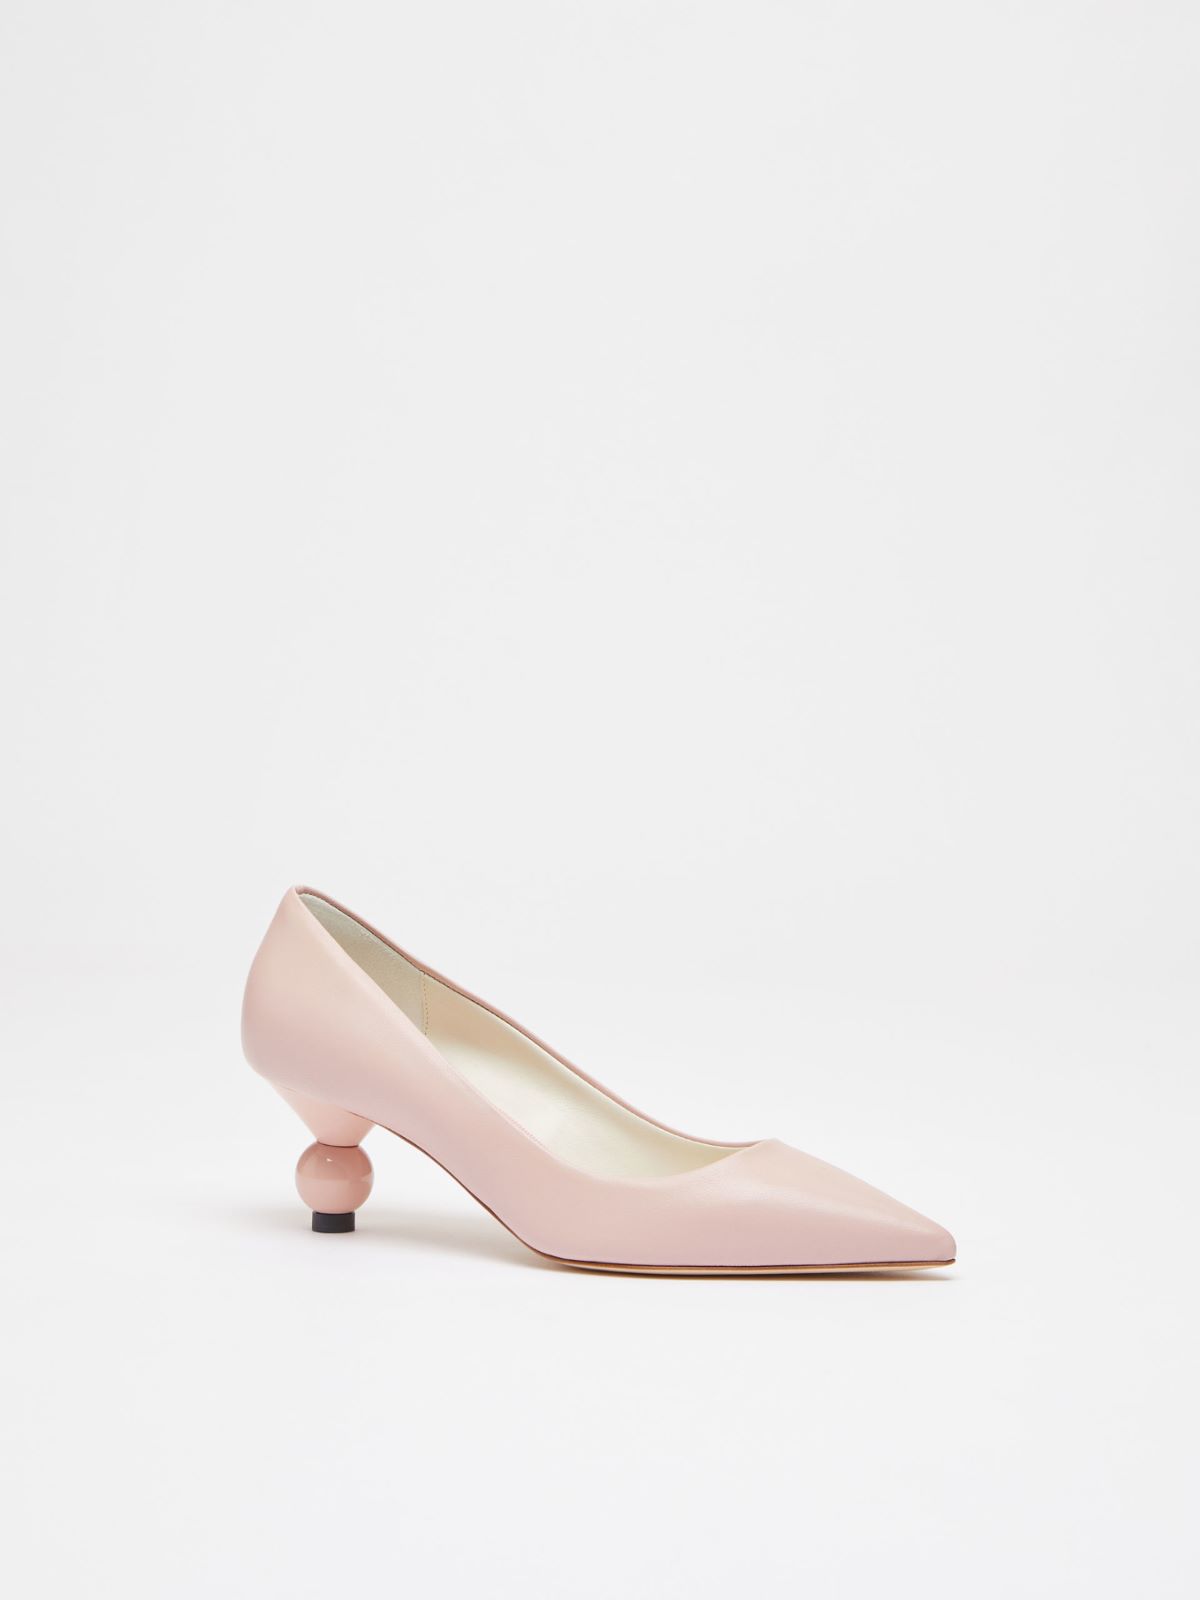 Nappa leather court shoes - ANTIQUE ROSE - Weekend Max Mara - 2